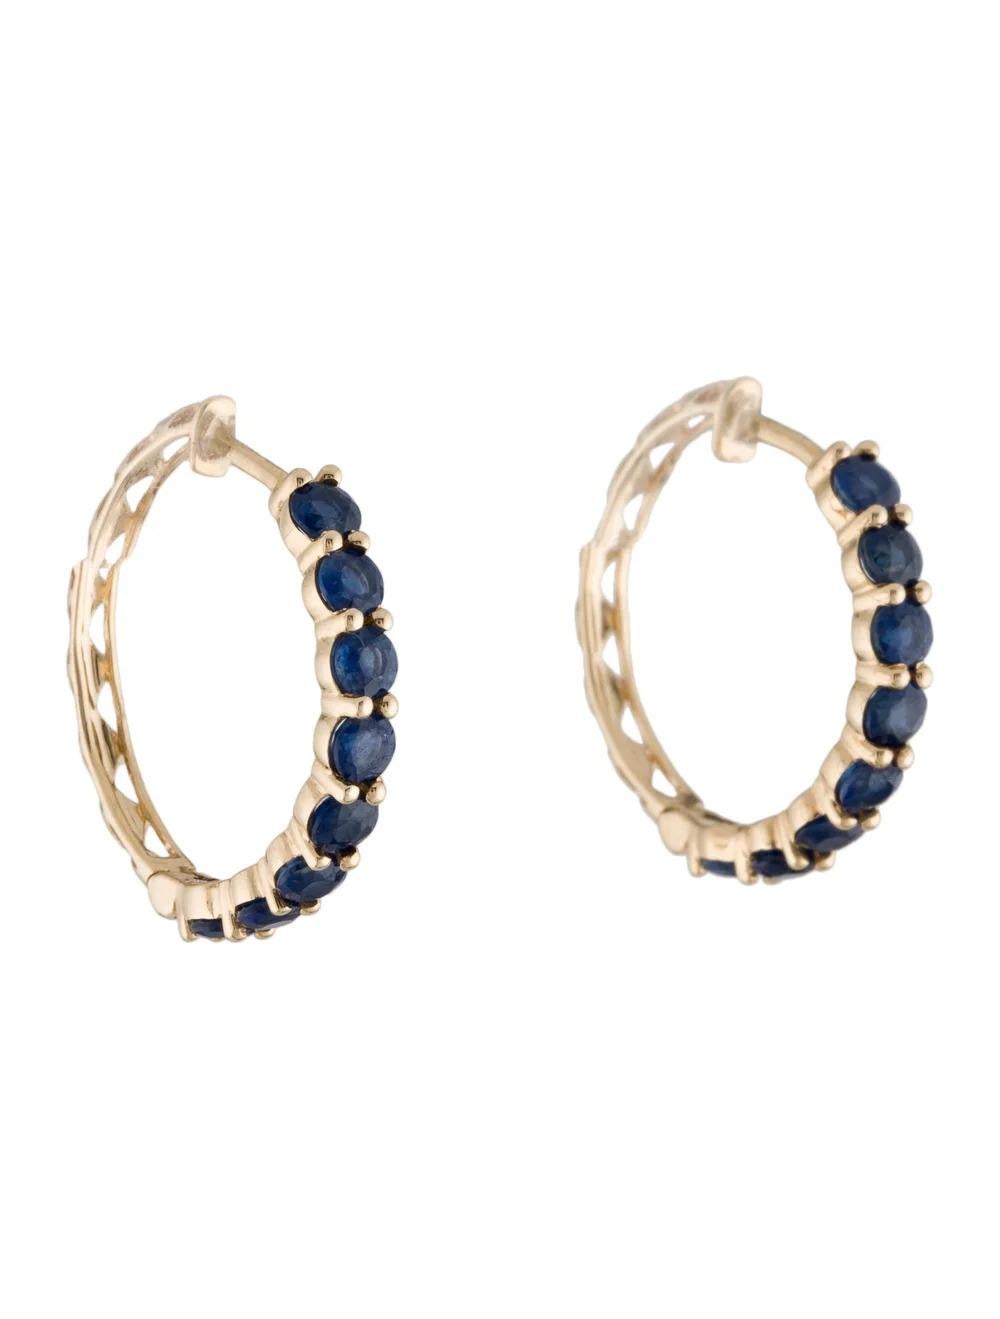 Introducing our exquisite 14K Yellow Gold Sapphire Hoop Earrings, a stunning addition to your fine jewelry collection.

Specifications:

* Metal: 14K Yellow Gold
* Length: 0.75